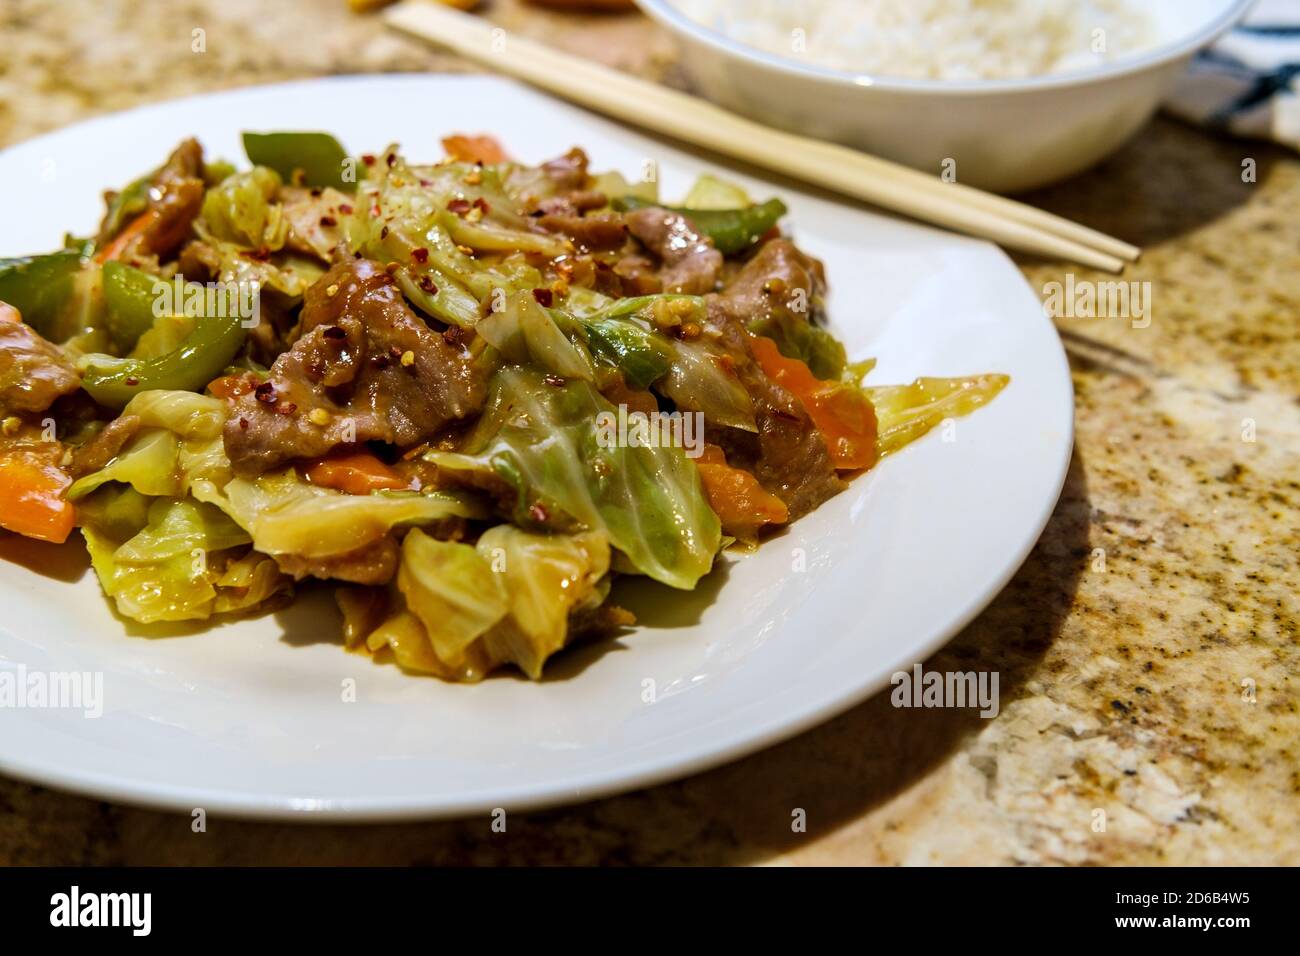 Chinese Cuisine Double Cooked Pork With Cabbage Stock Photo Alamy